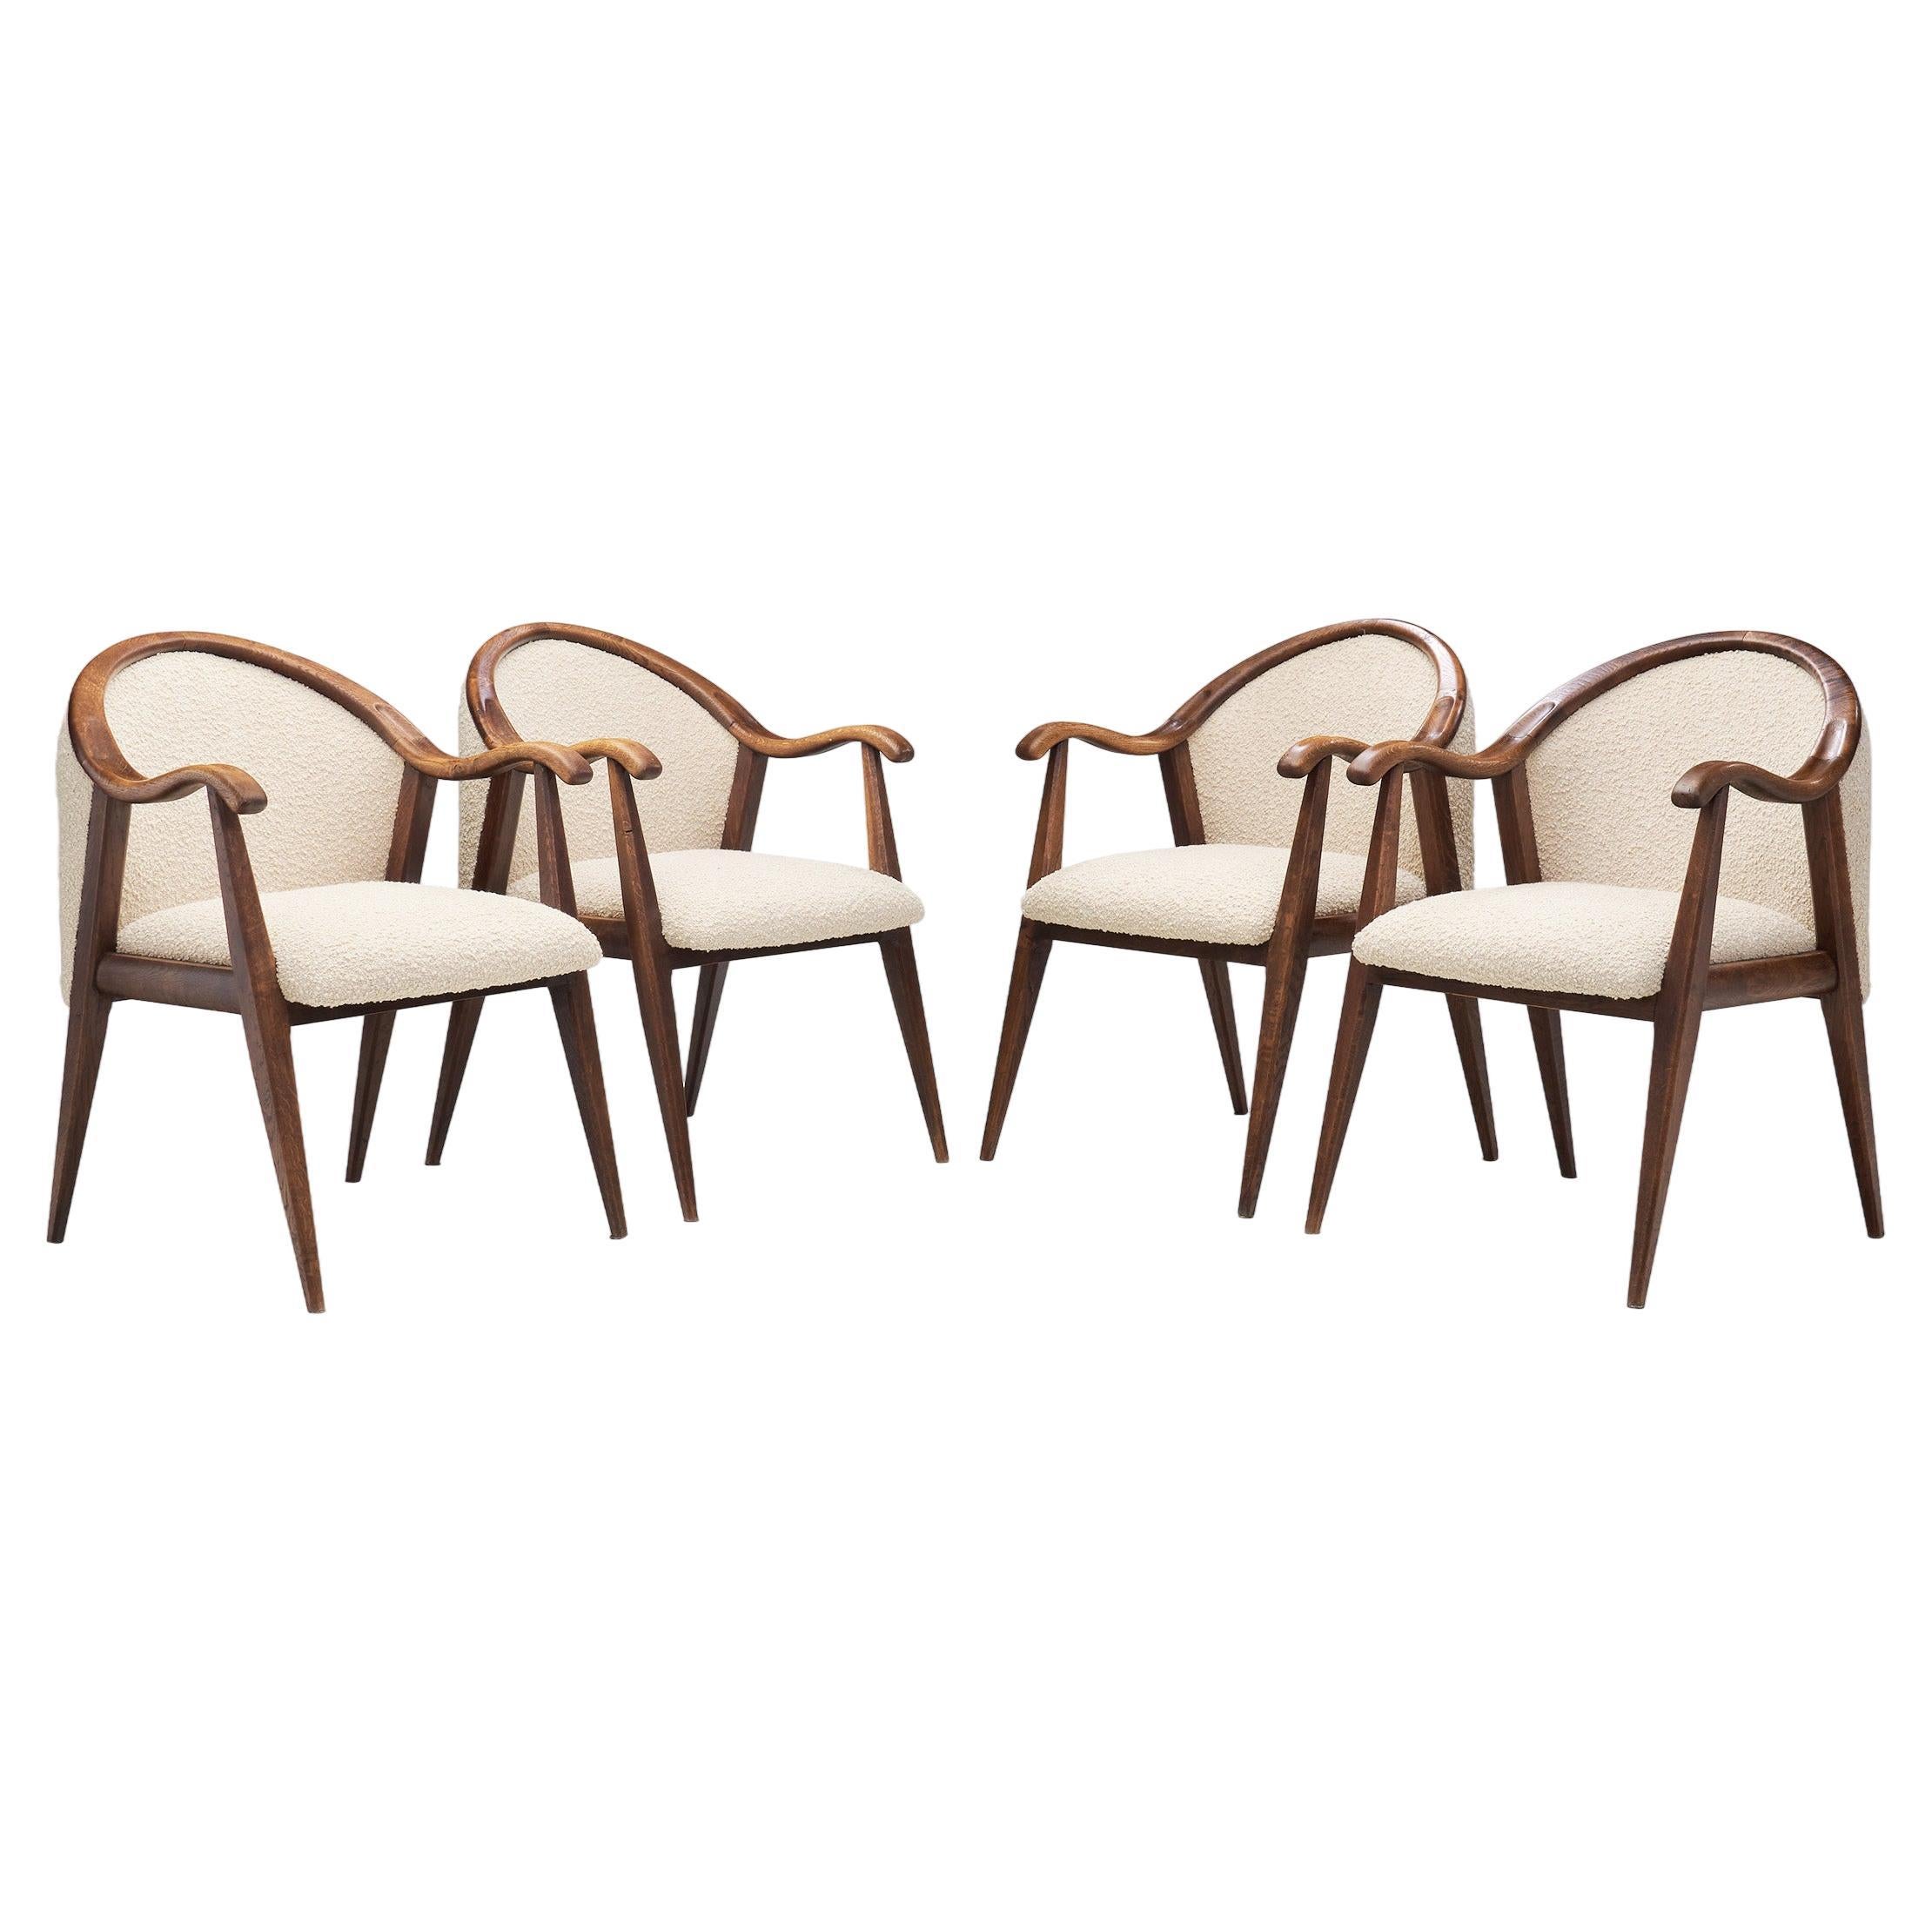 French Oak Art Deco Chairs in Taupe Bouclé, France 1930s